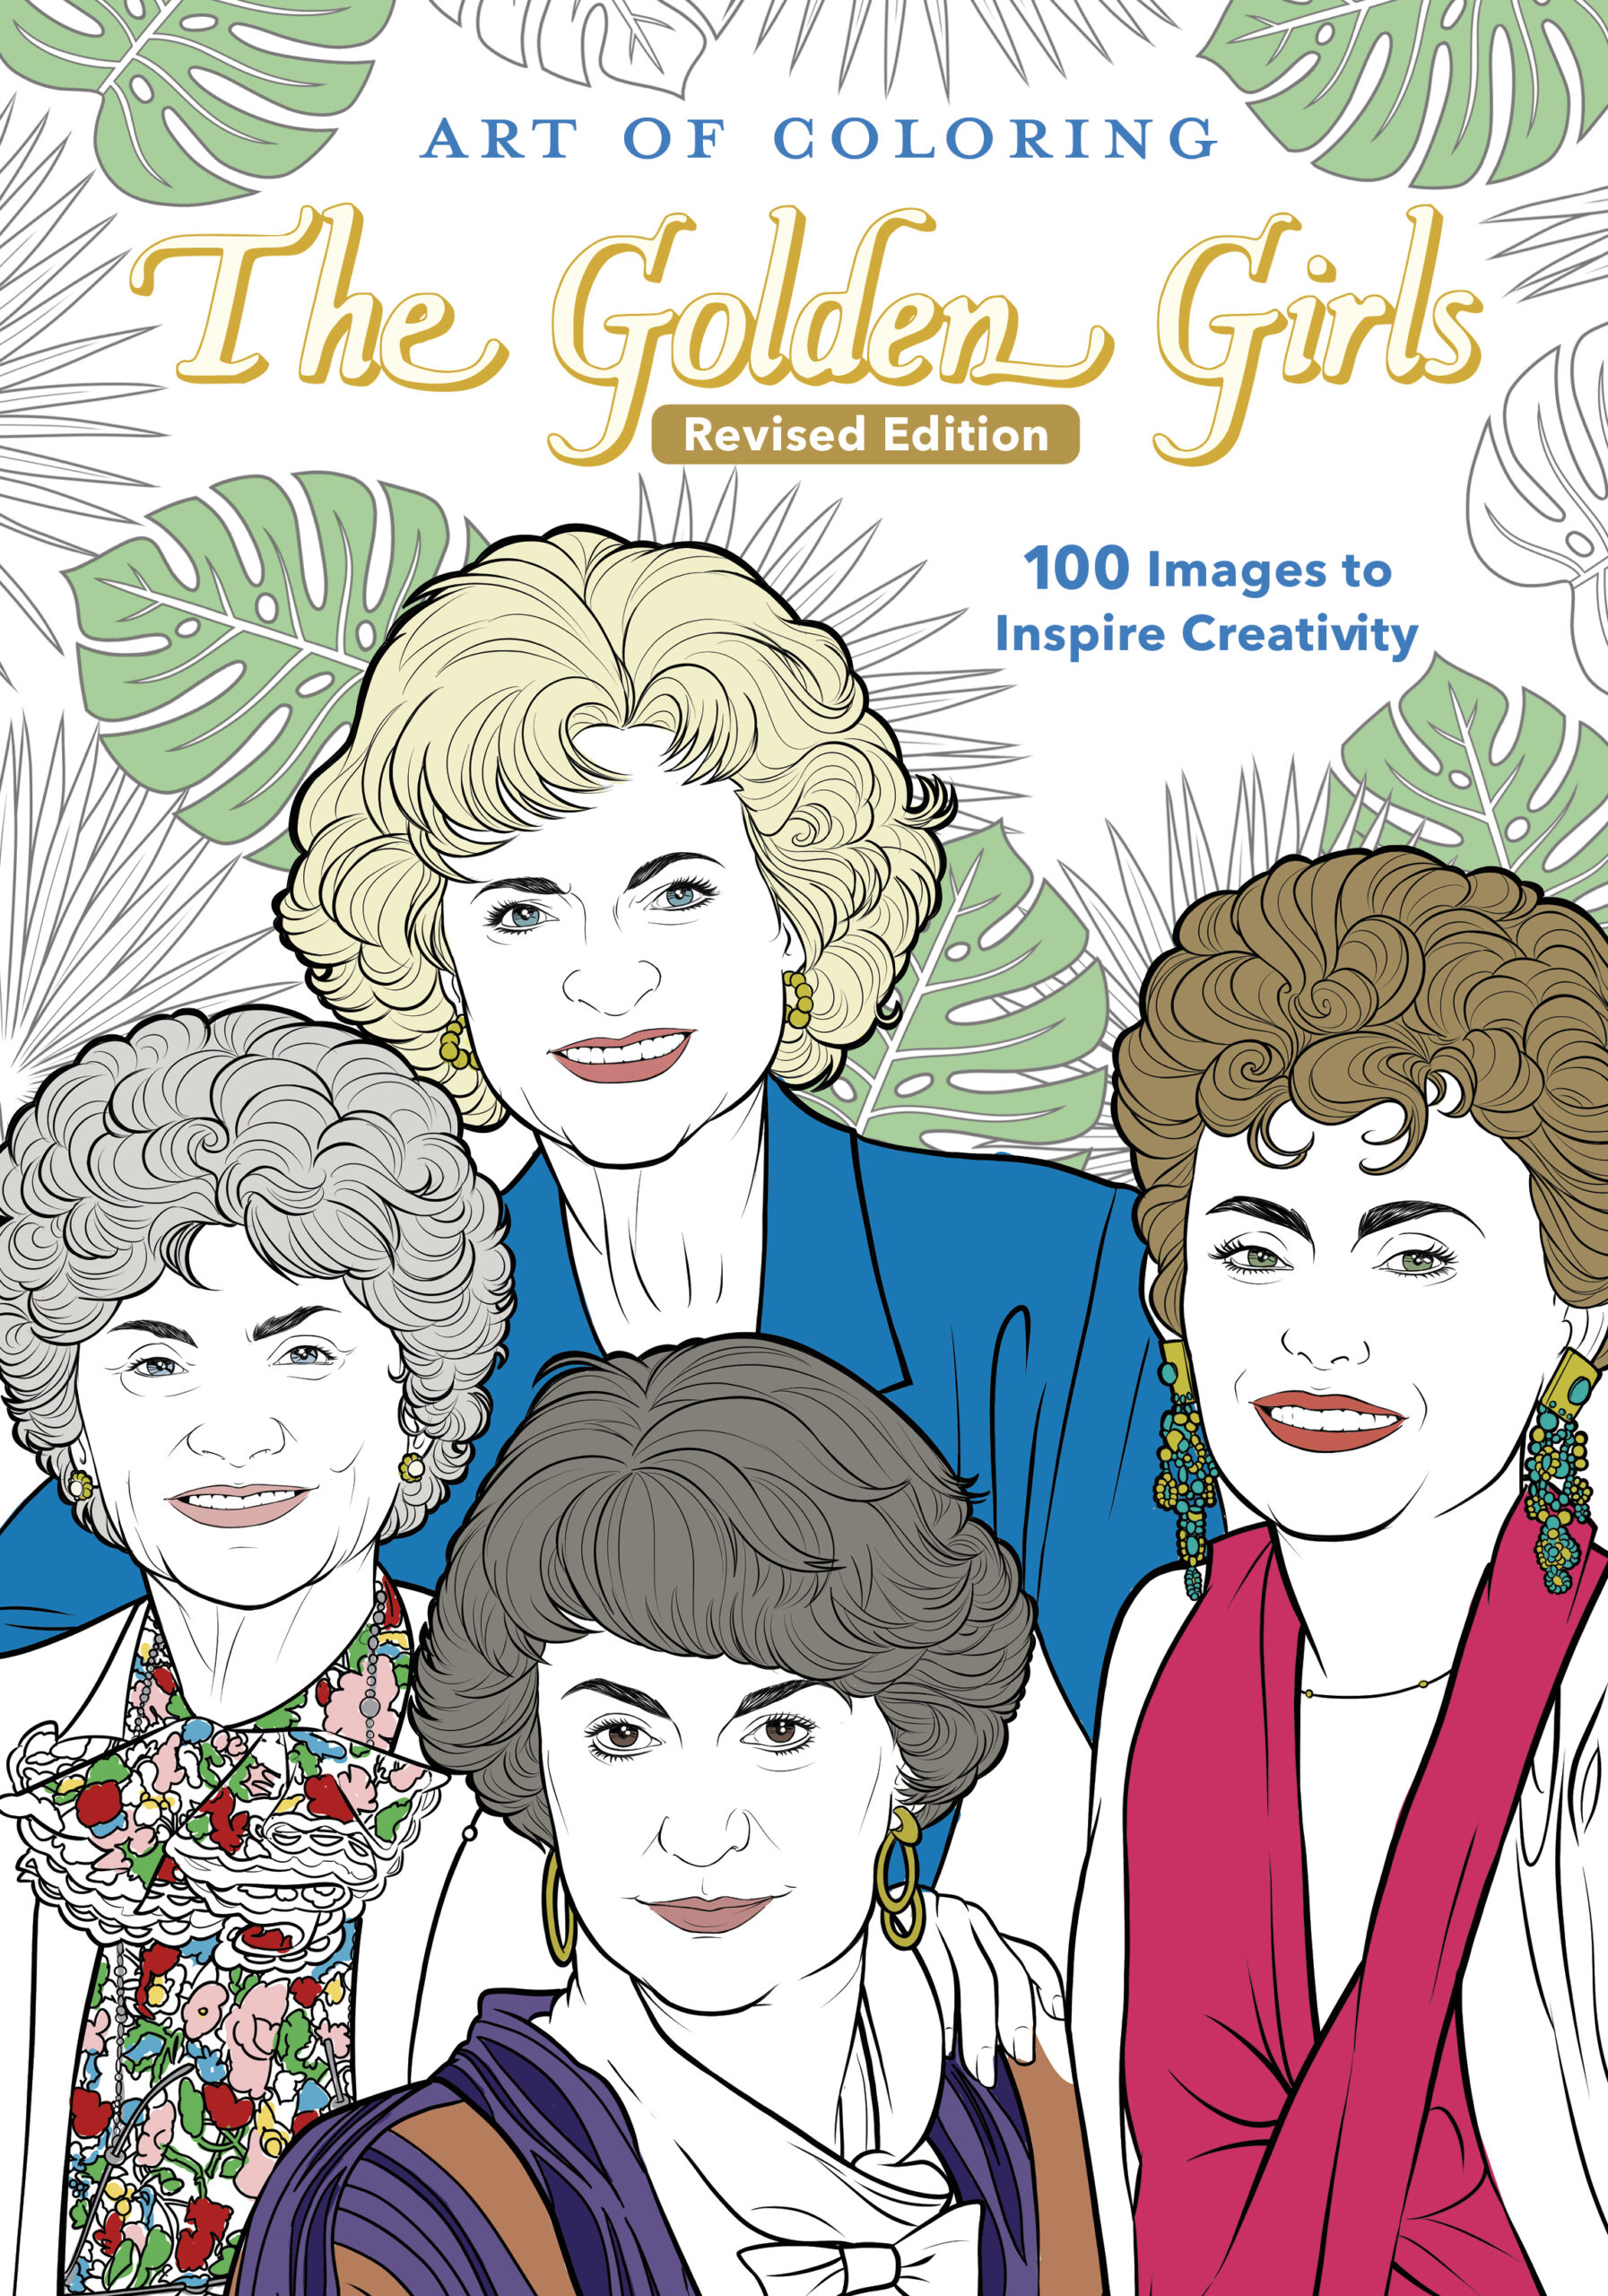 Art of Coloring: Golden Girls Revised Edition by - Art of Coloring